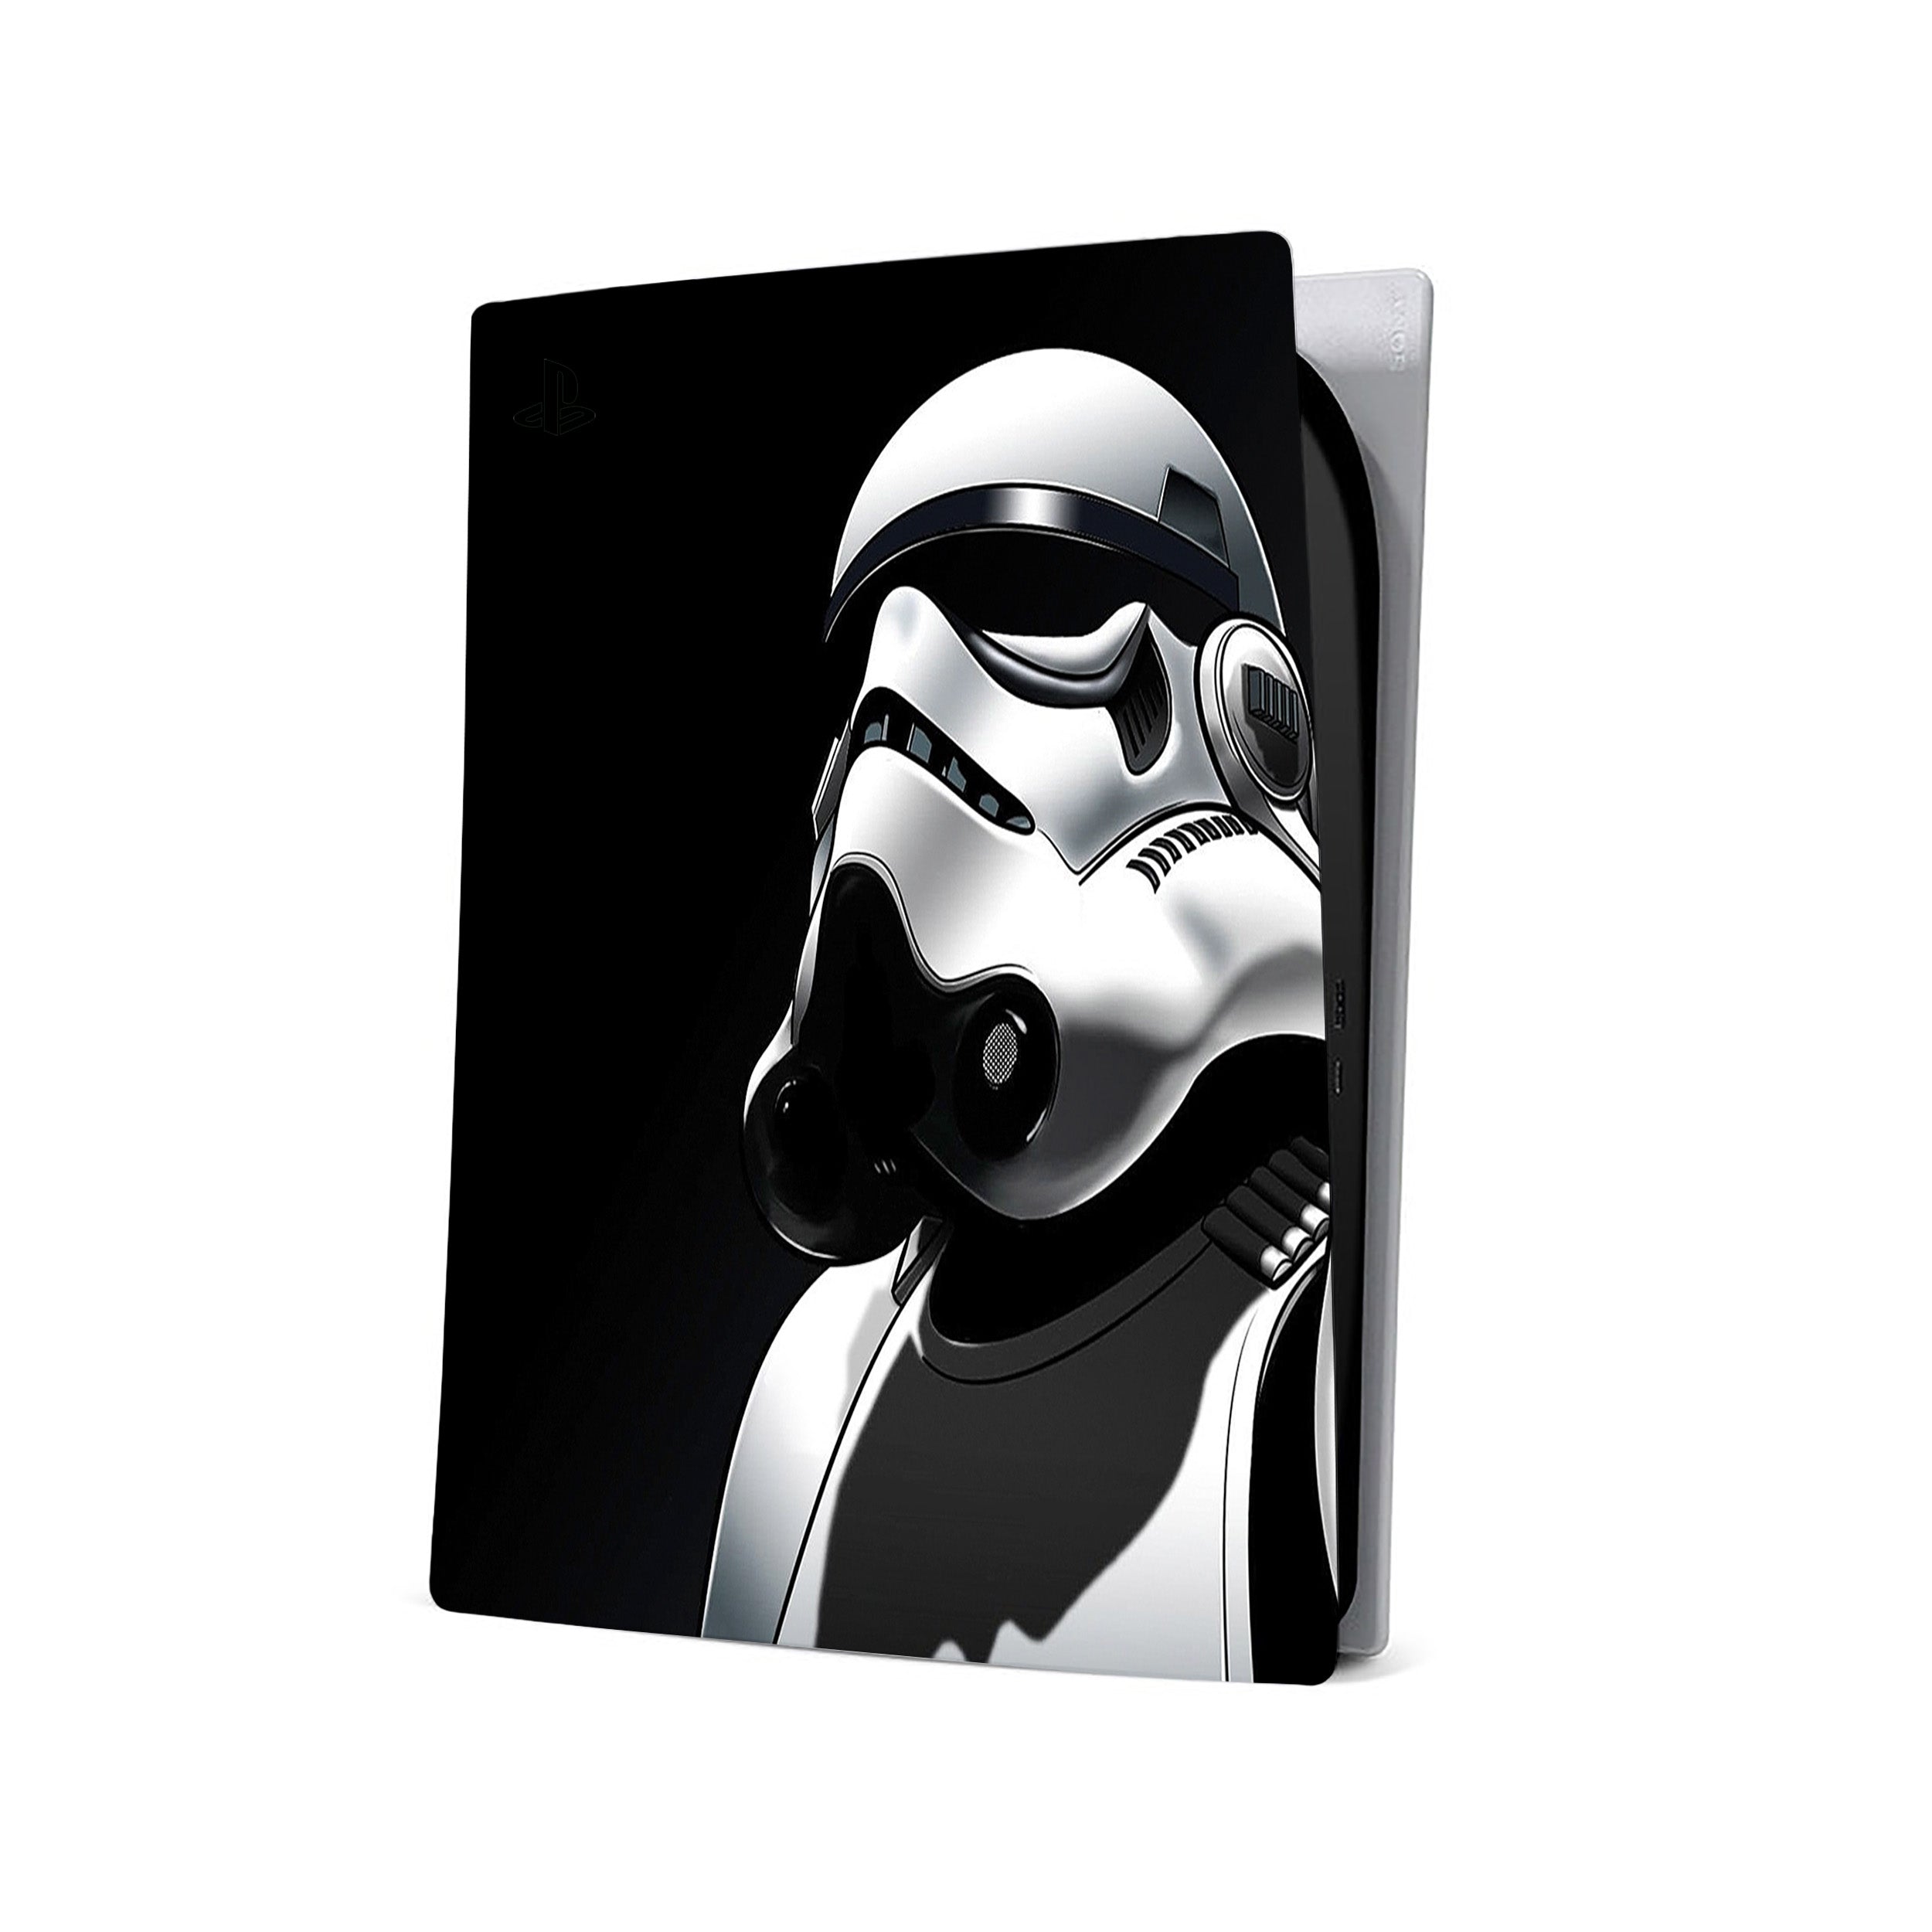 A video game skin featuring a Star Wars Storm Trooper Moonwalk design for the PS5.